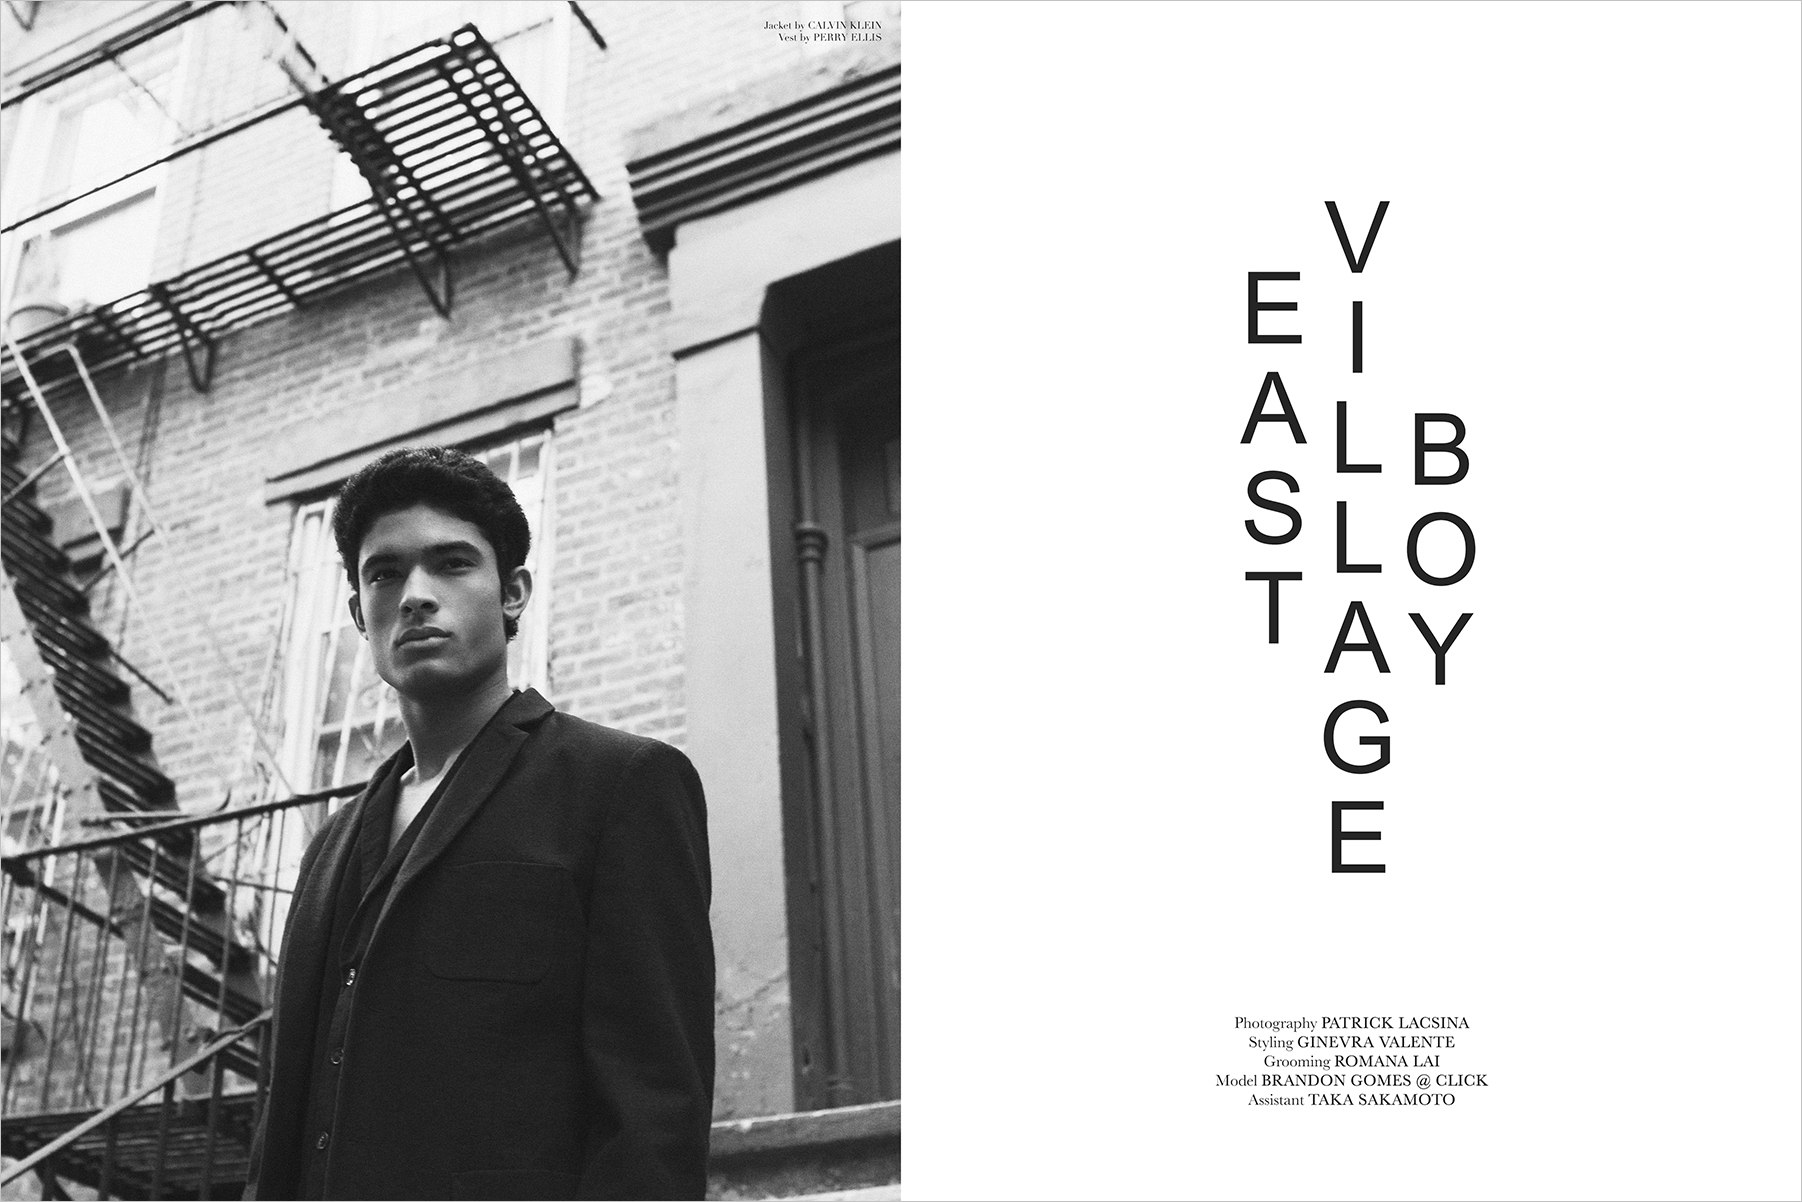 CHASSEUR WEBDITORIAL : EAST VILLAGE BOY BY PATRICK LACSINA - Chasseur ...